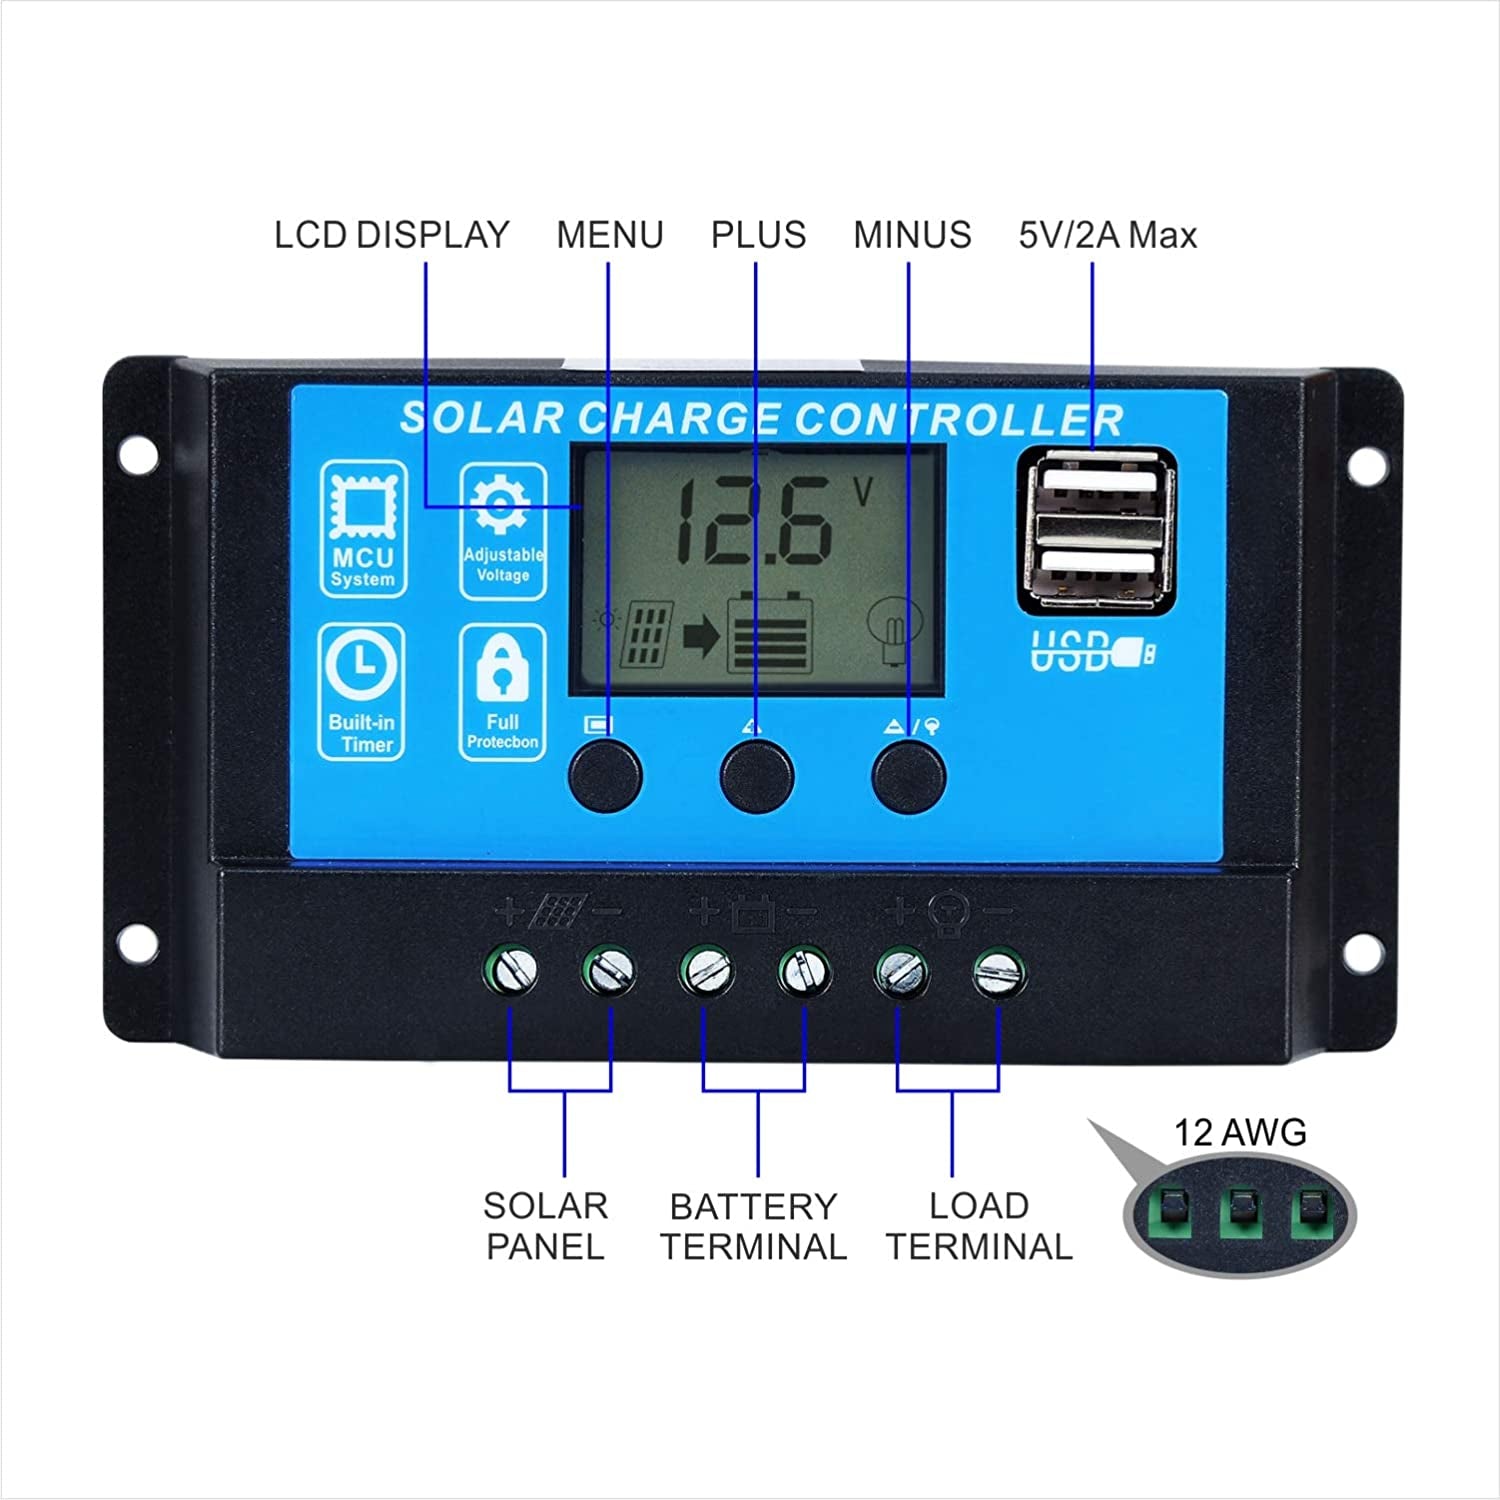 GCSOAR, GCSOAR Solar Panel Regulator Charge Controller with LCD Display, Dual USB Ports Overload Protection Timer Setting 10A 12V/24V (10A)